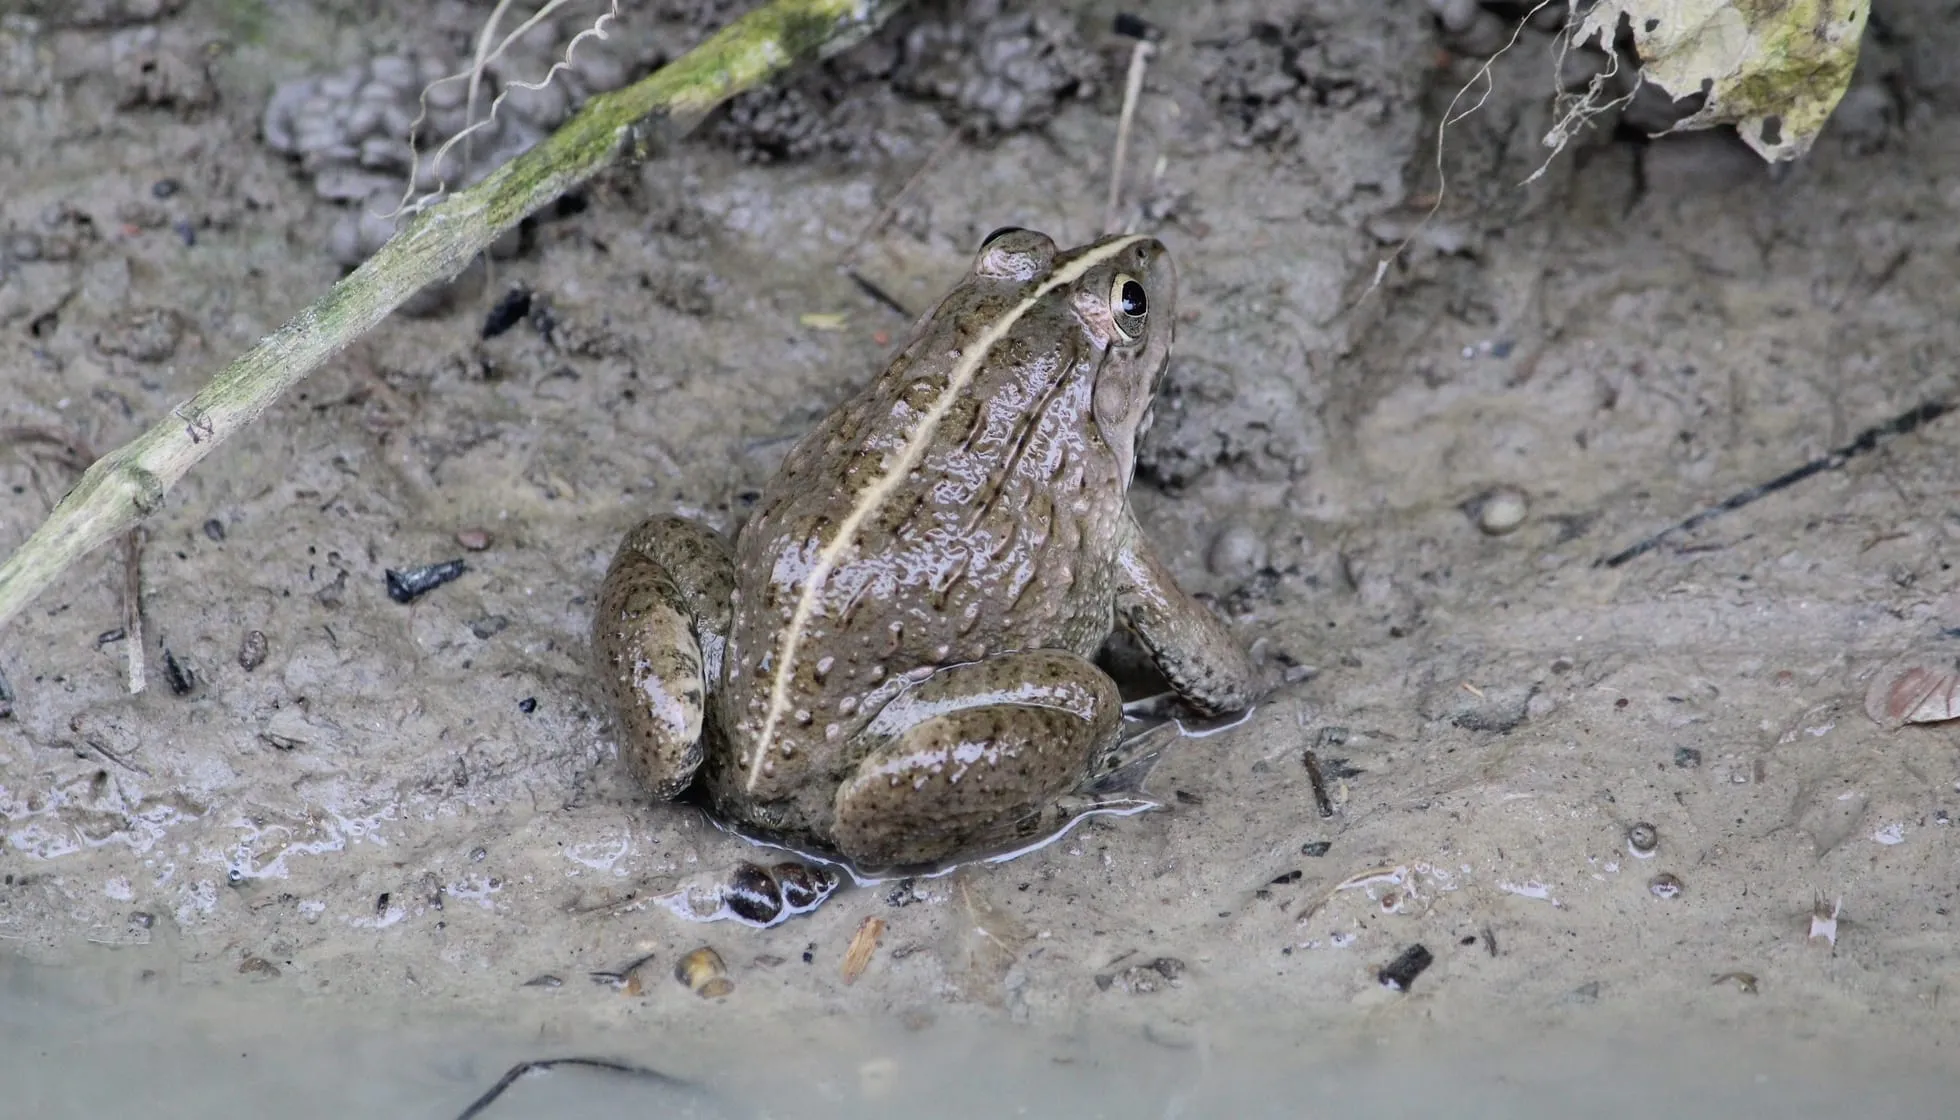 Indian common frog in mud